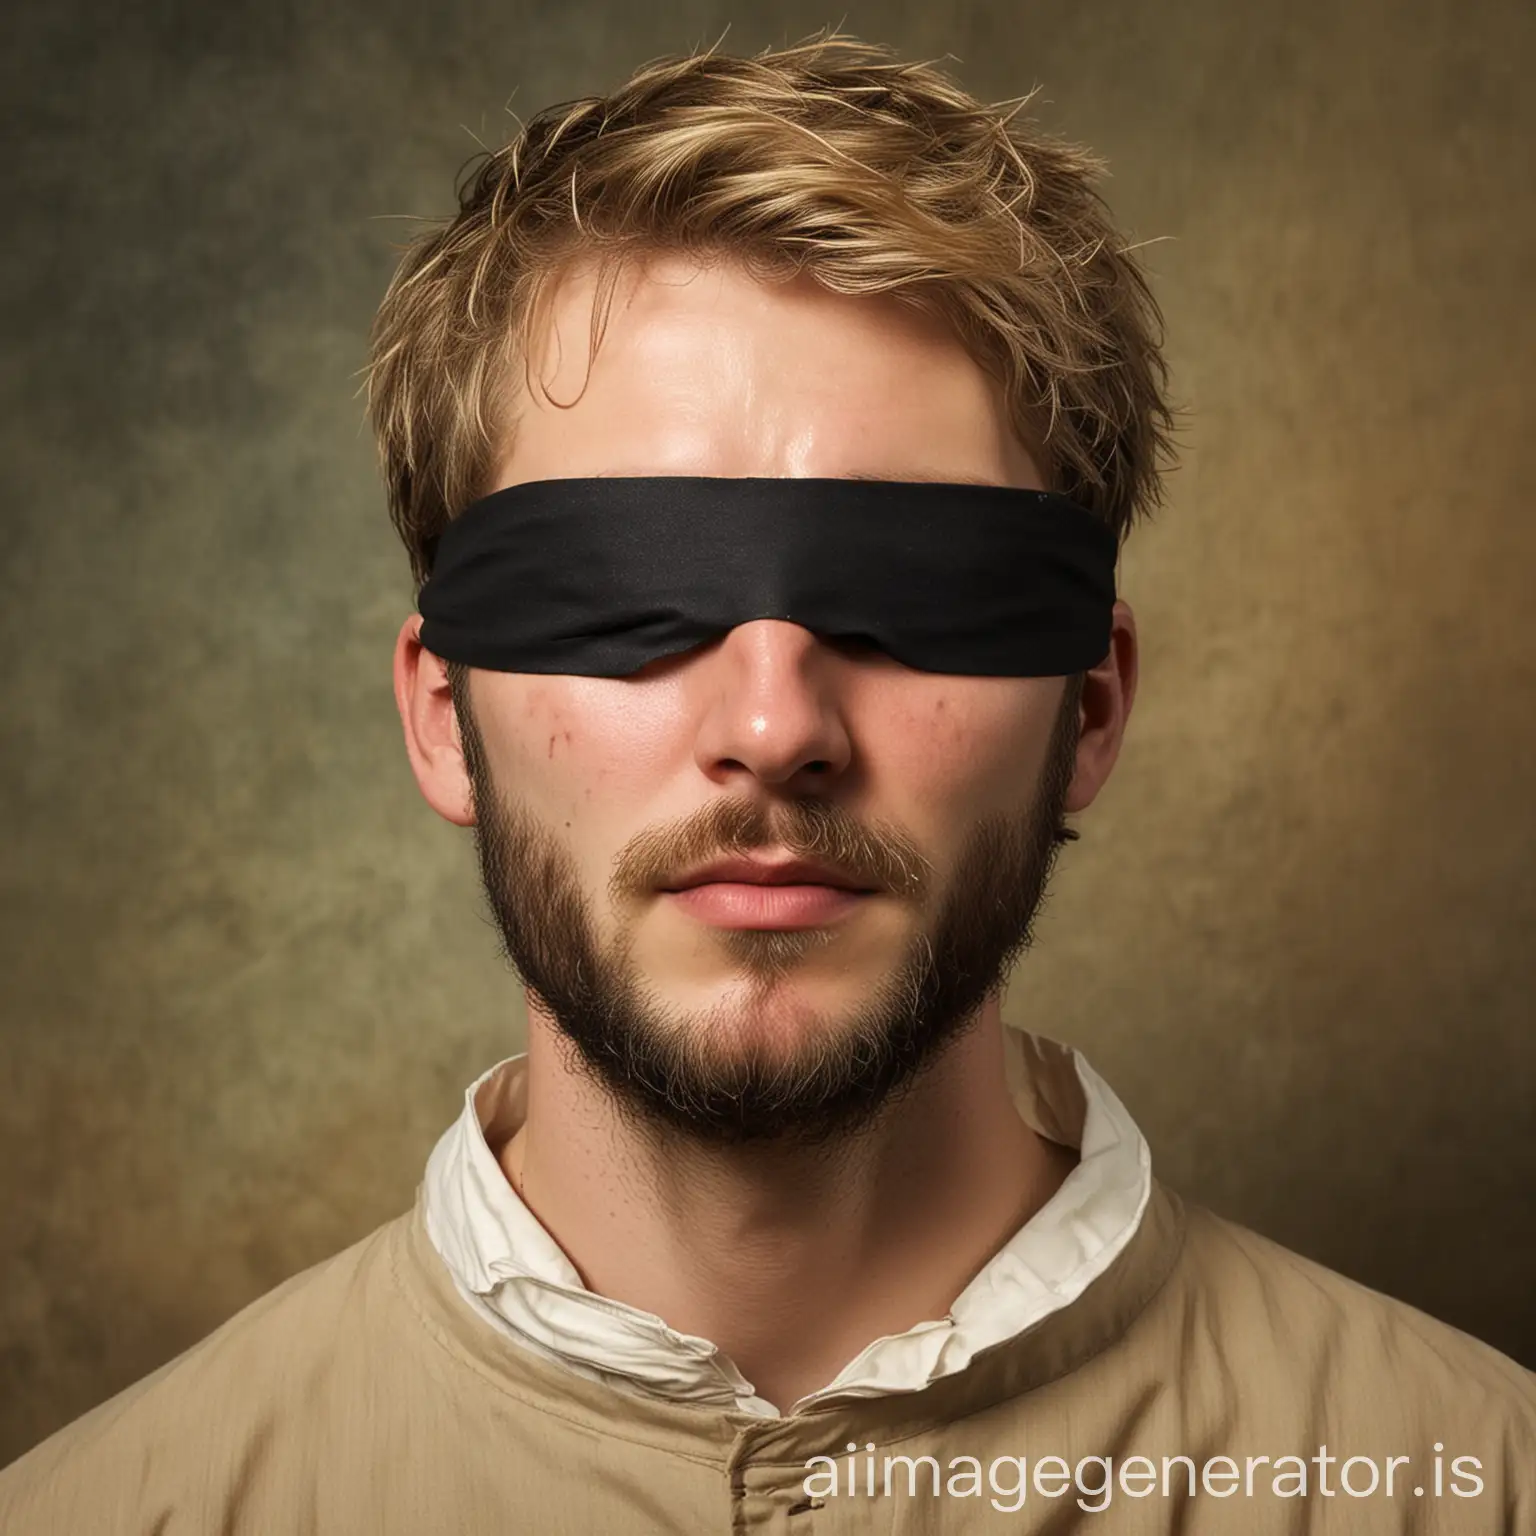 A young priest around 30 years old, blond with a scruffy beard or stubble. He wears a blindfold over his eyes as he is blind, and this blindfold should fit snugly against his face and completely cover his eyes without any openings or crooked lines. His face has old burn scars on the left side of it.